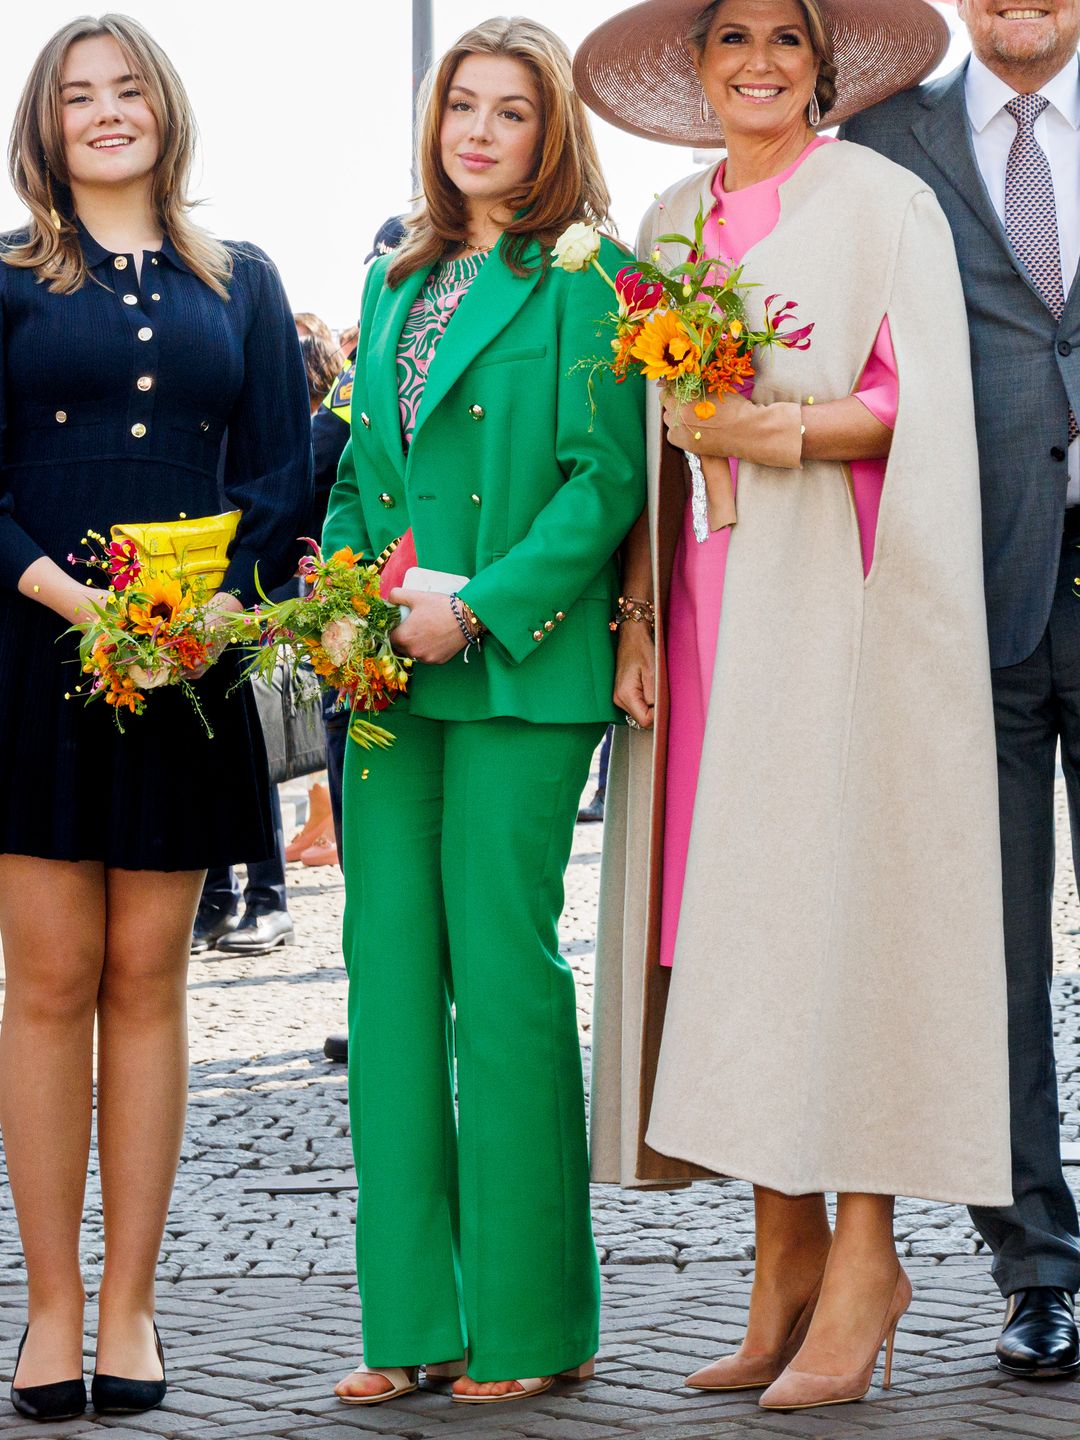 Princess Ariane of The Netherlands, Princess Alexia of The Netherlands, Queen Maxima of The Netherlands, King Willem-Alexander of The Netherlands and Princess Amalia of The Netherlands attend the Kingsday celebration in the city center on April 27, 2022 in Maastricht, Netherlands. Kingsday is the national celebration of the Kings Birthday. (Photo by P van Katwijk/Getty Images)